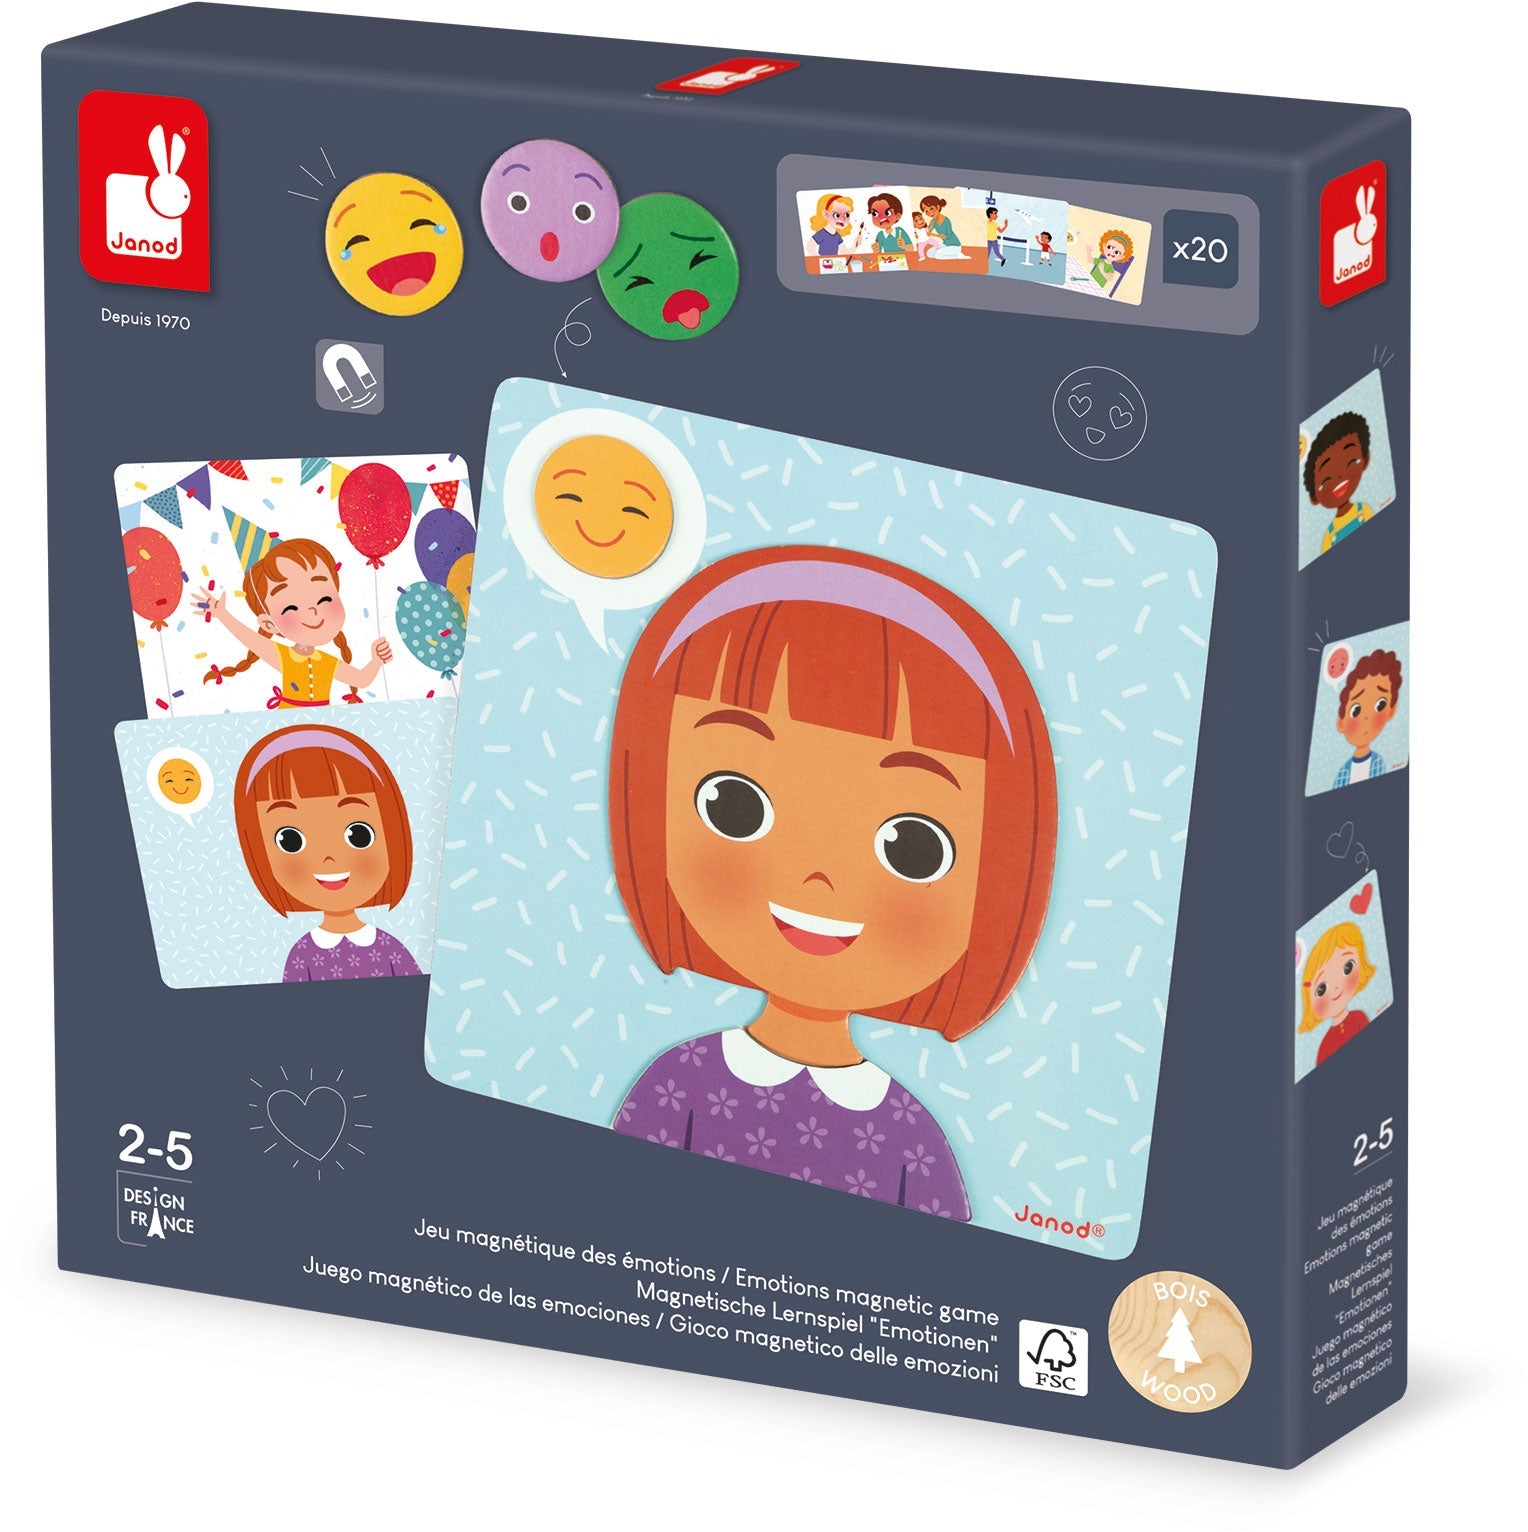 Discover Emotions Magnetic Game - Janod